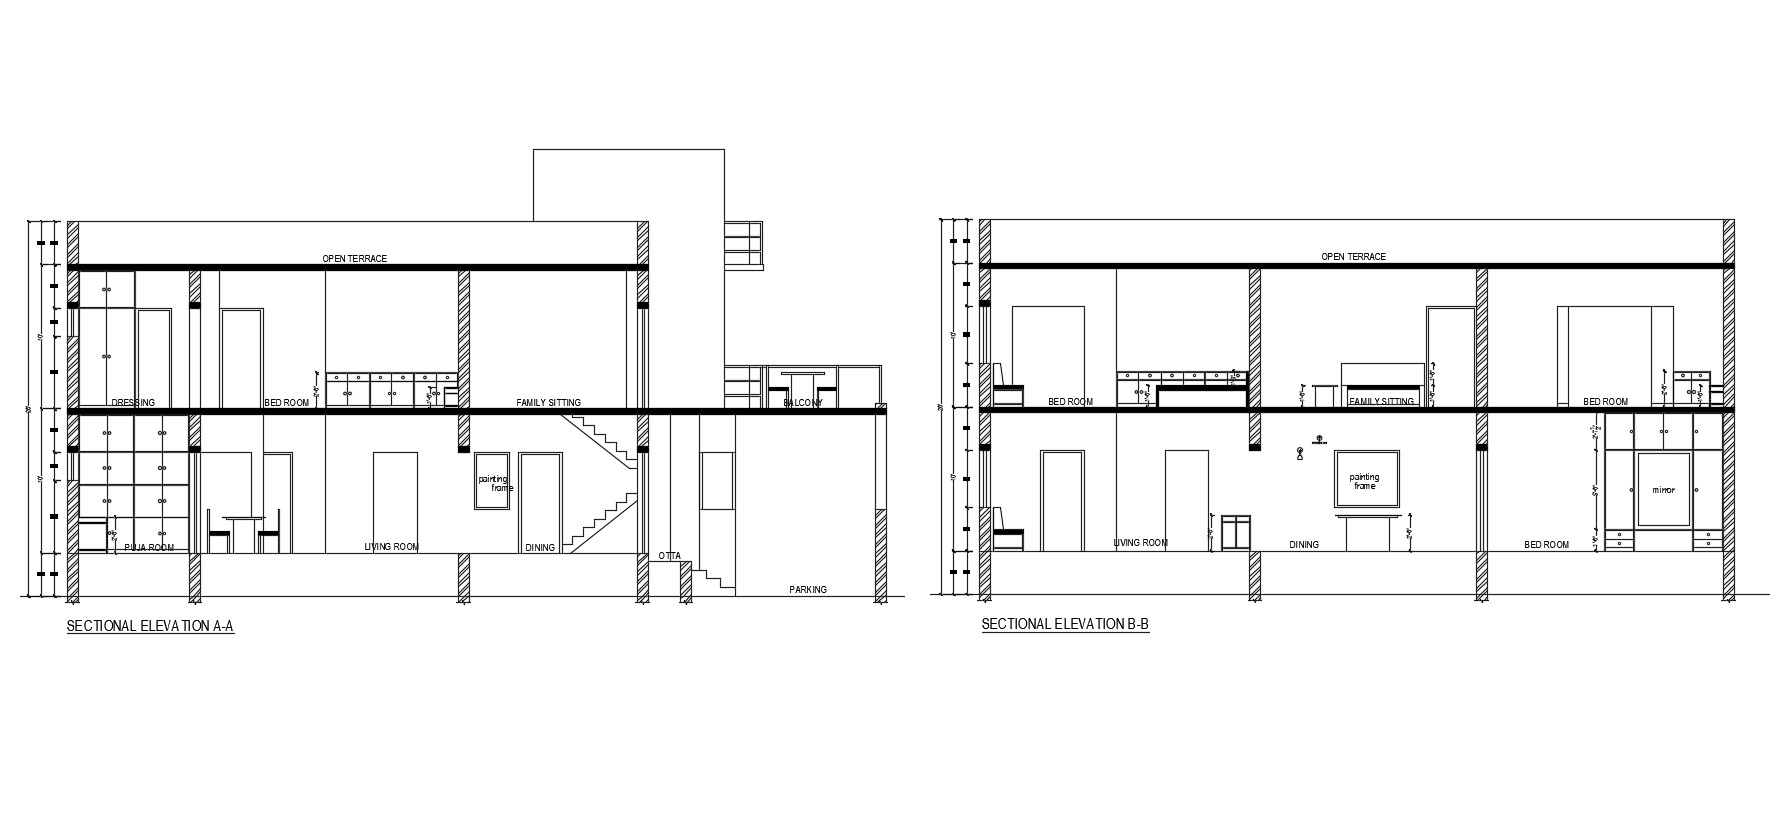 Sectional elevation of 2 storey house in AutoCAD Cadbull